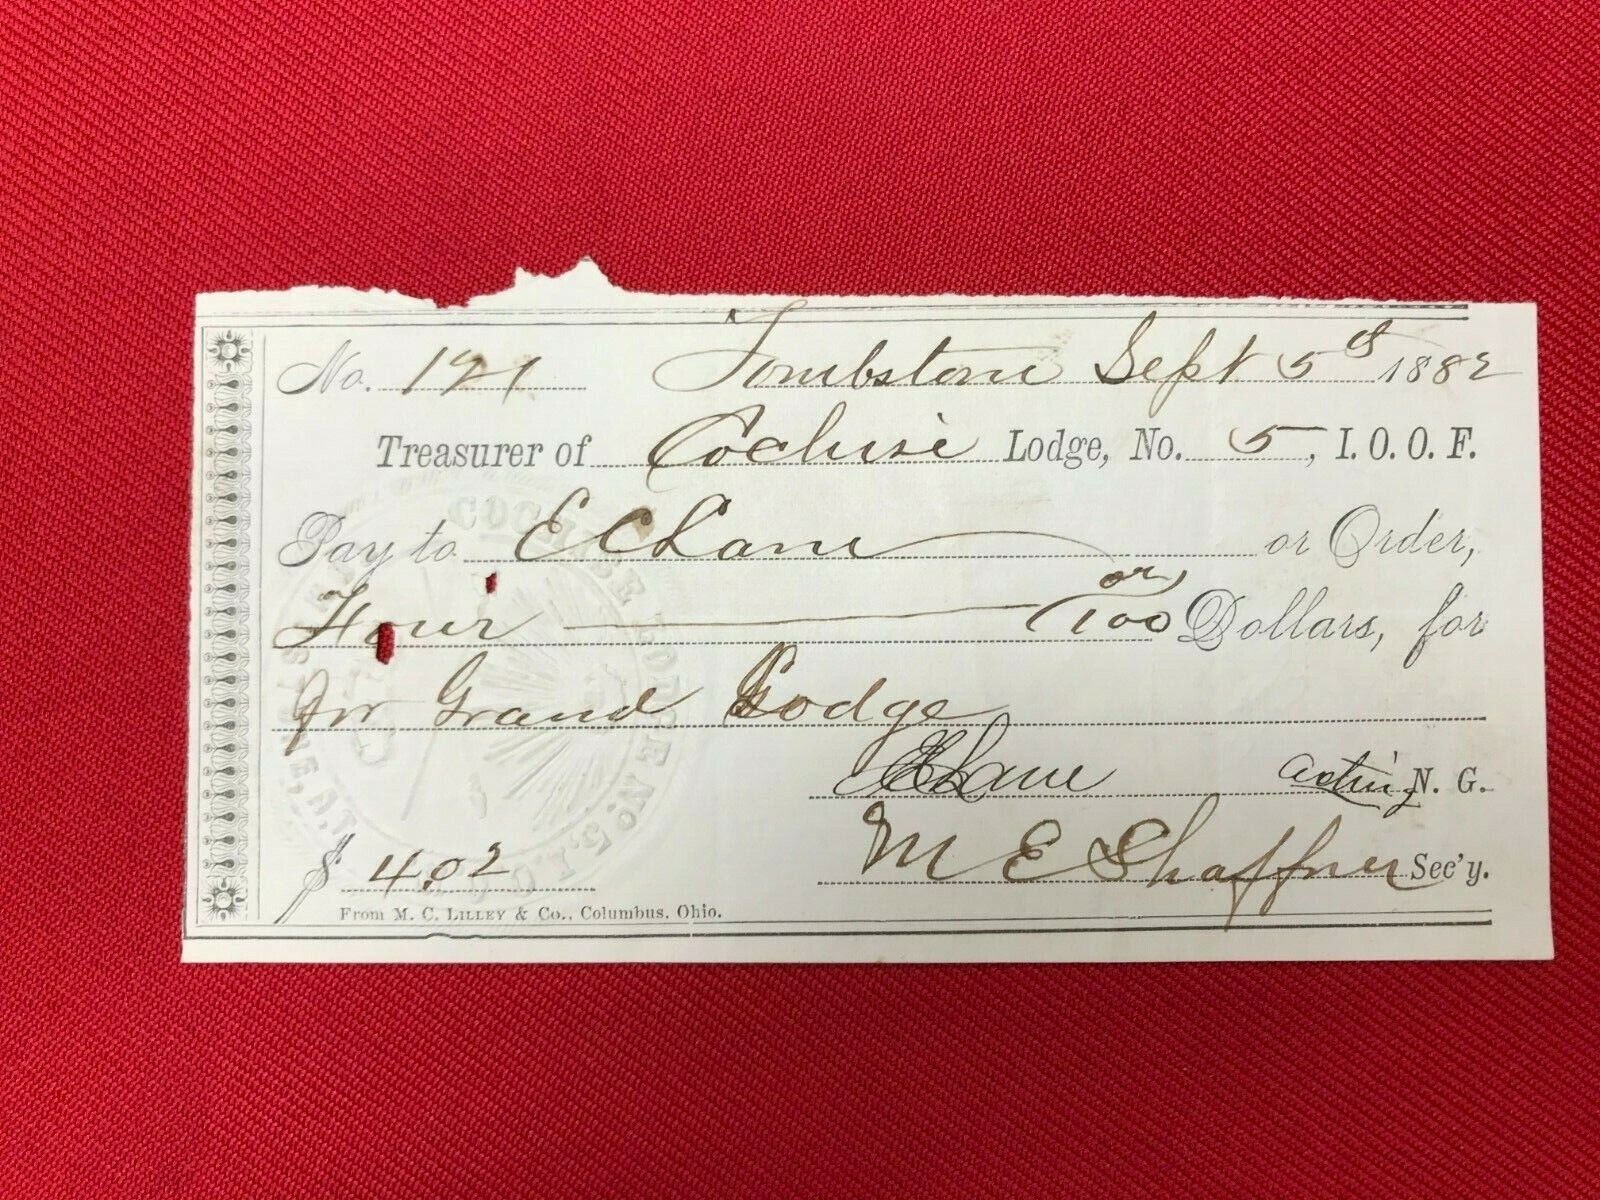 1882 Cochise Lodge#5, Tombstone Receipt, Sept. 5, 1882